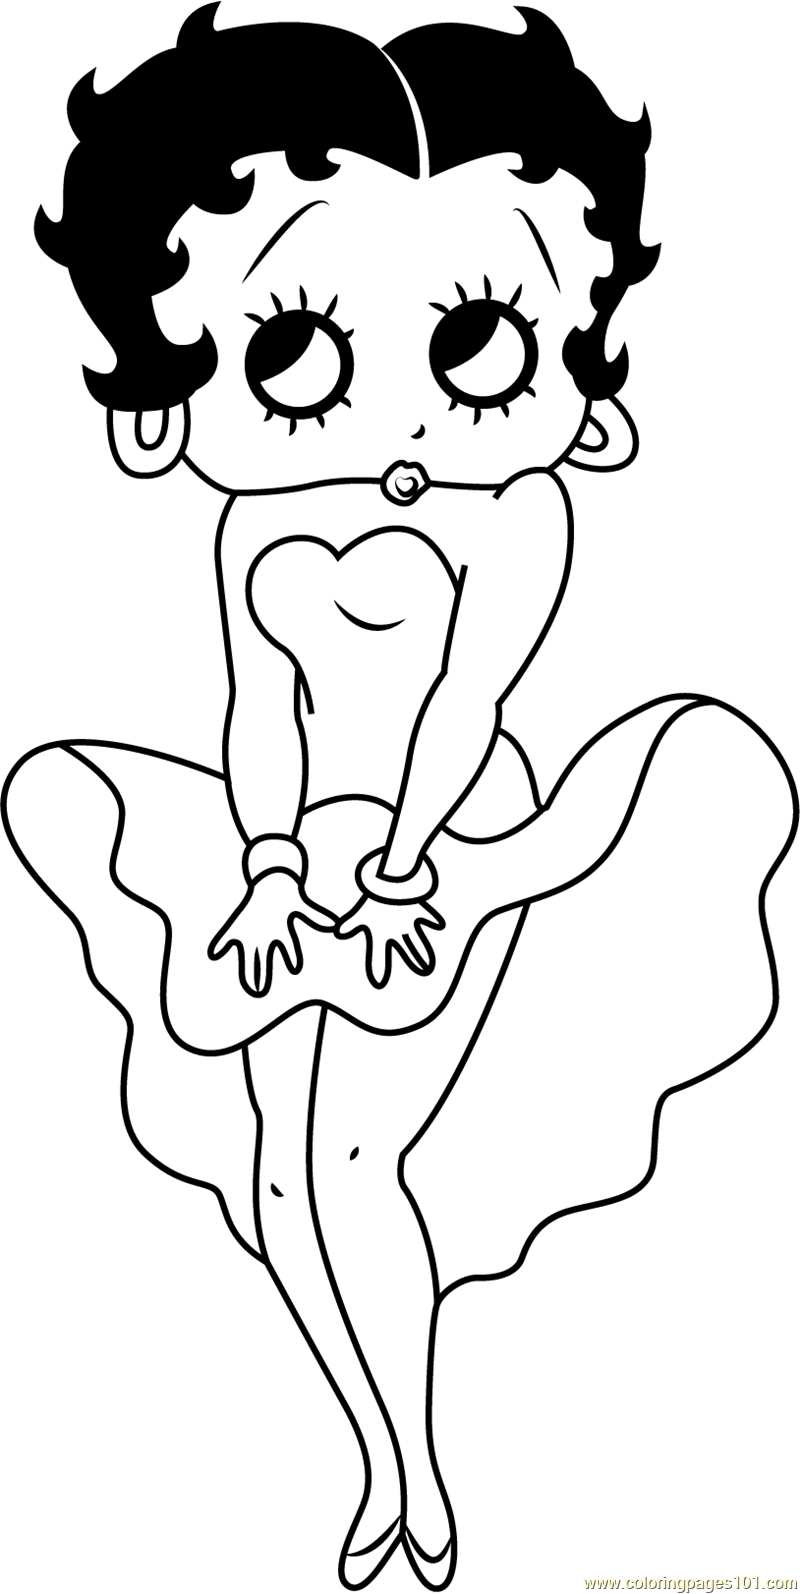 Look at Me Coloring Page - Free Betty Boop Coloring Pages